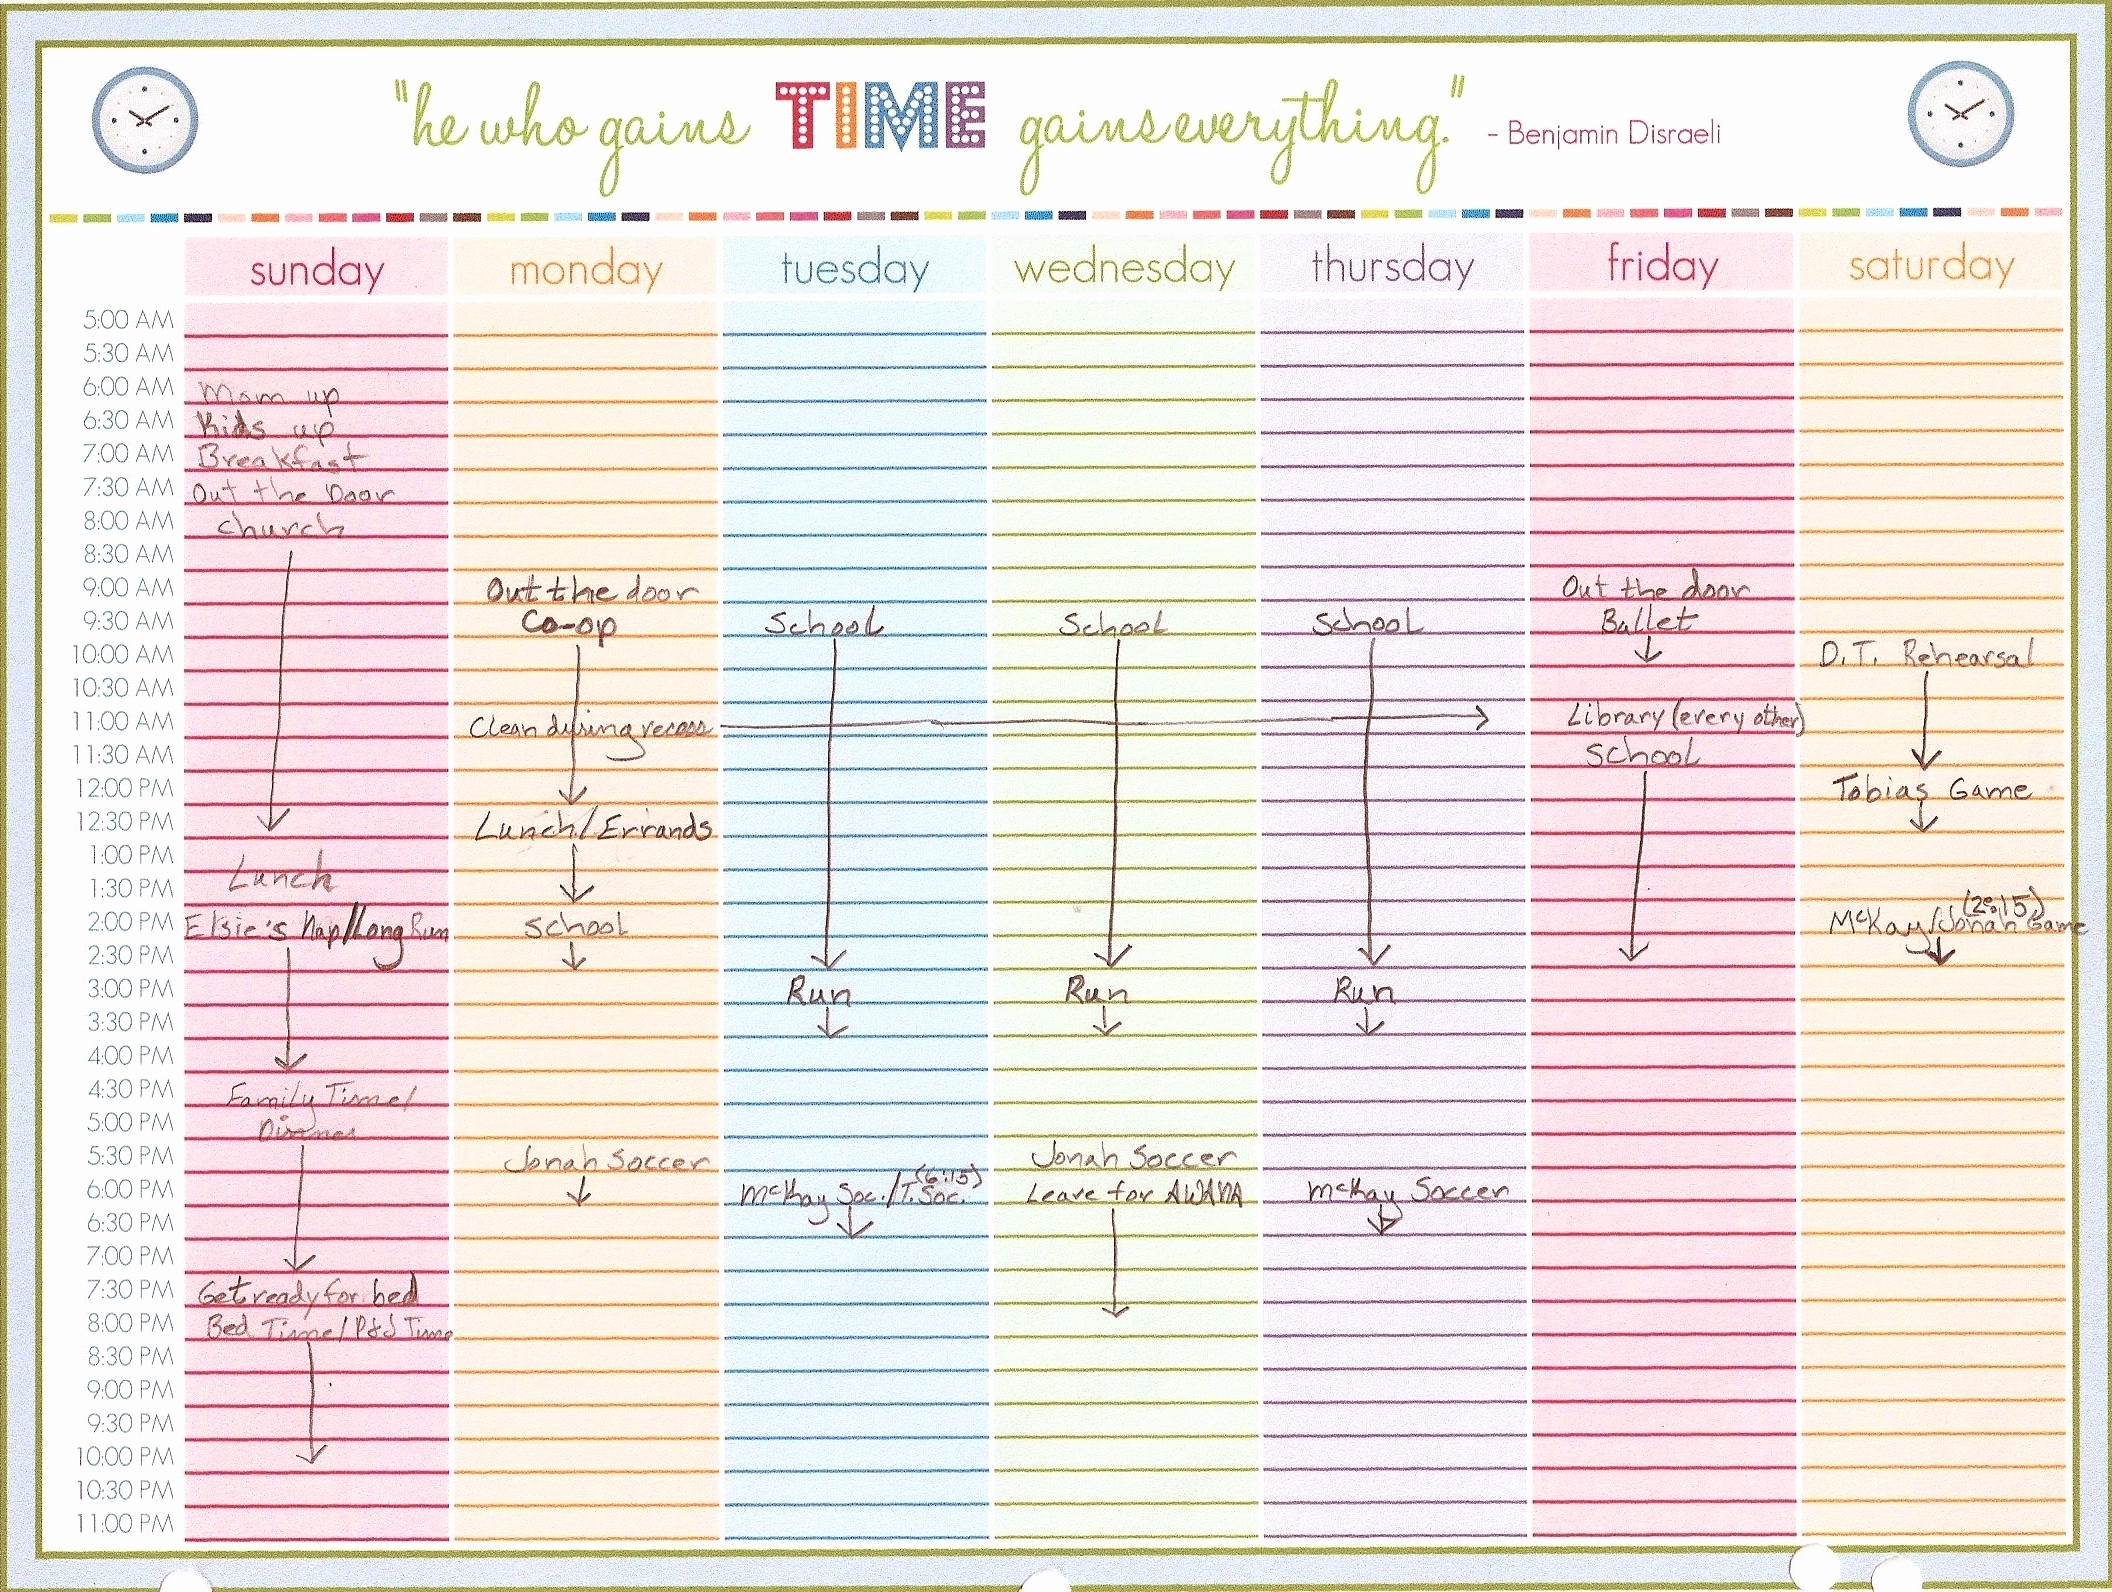 Awesome 23 Illustration Weekly Calendar Printable Weekly Calendars pertaining to Weekly Calendar With Time Slots Template